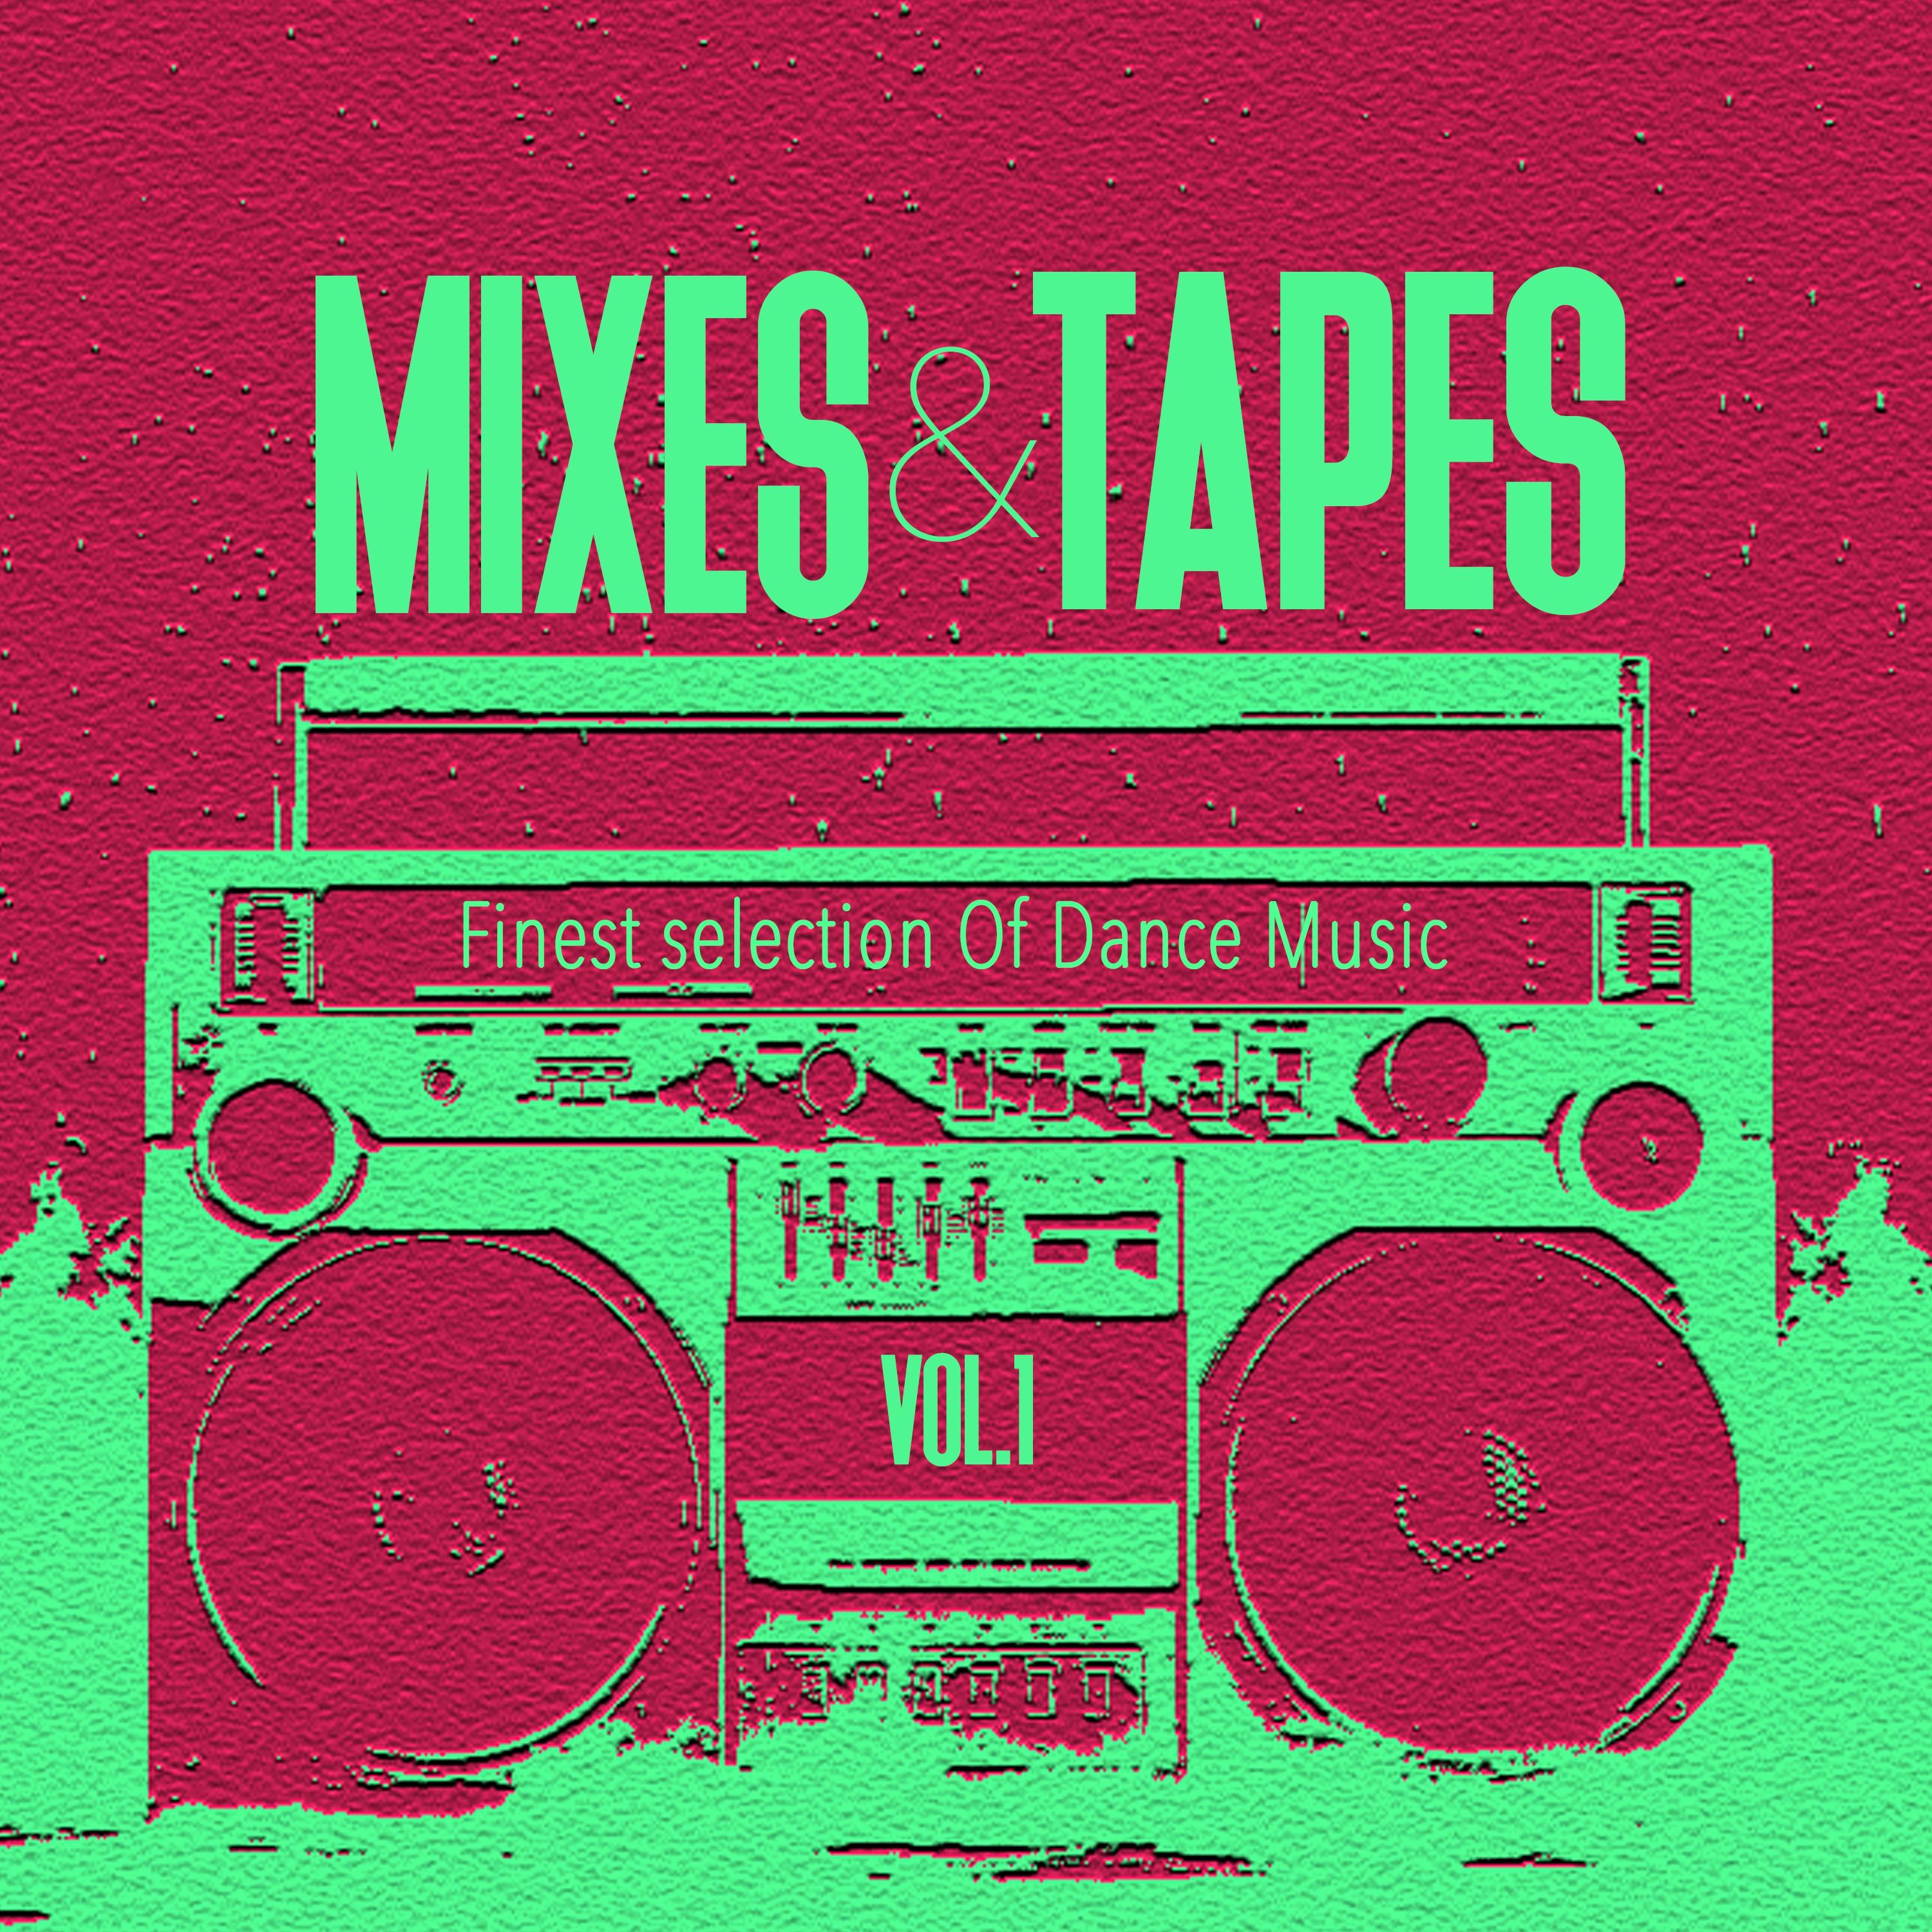 Mixes & Tapes, Vol. 1 - Finest Selection of Dance Music